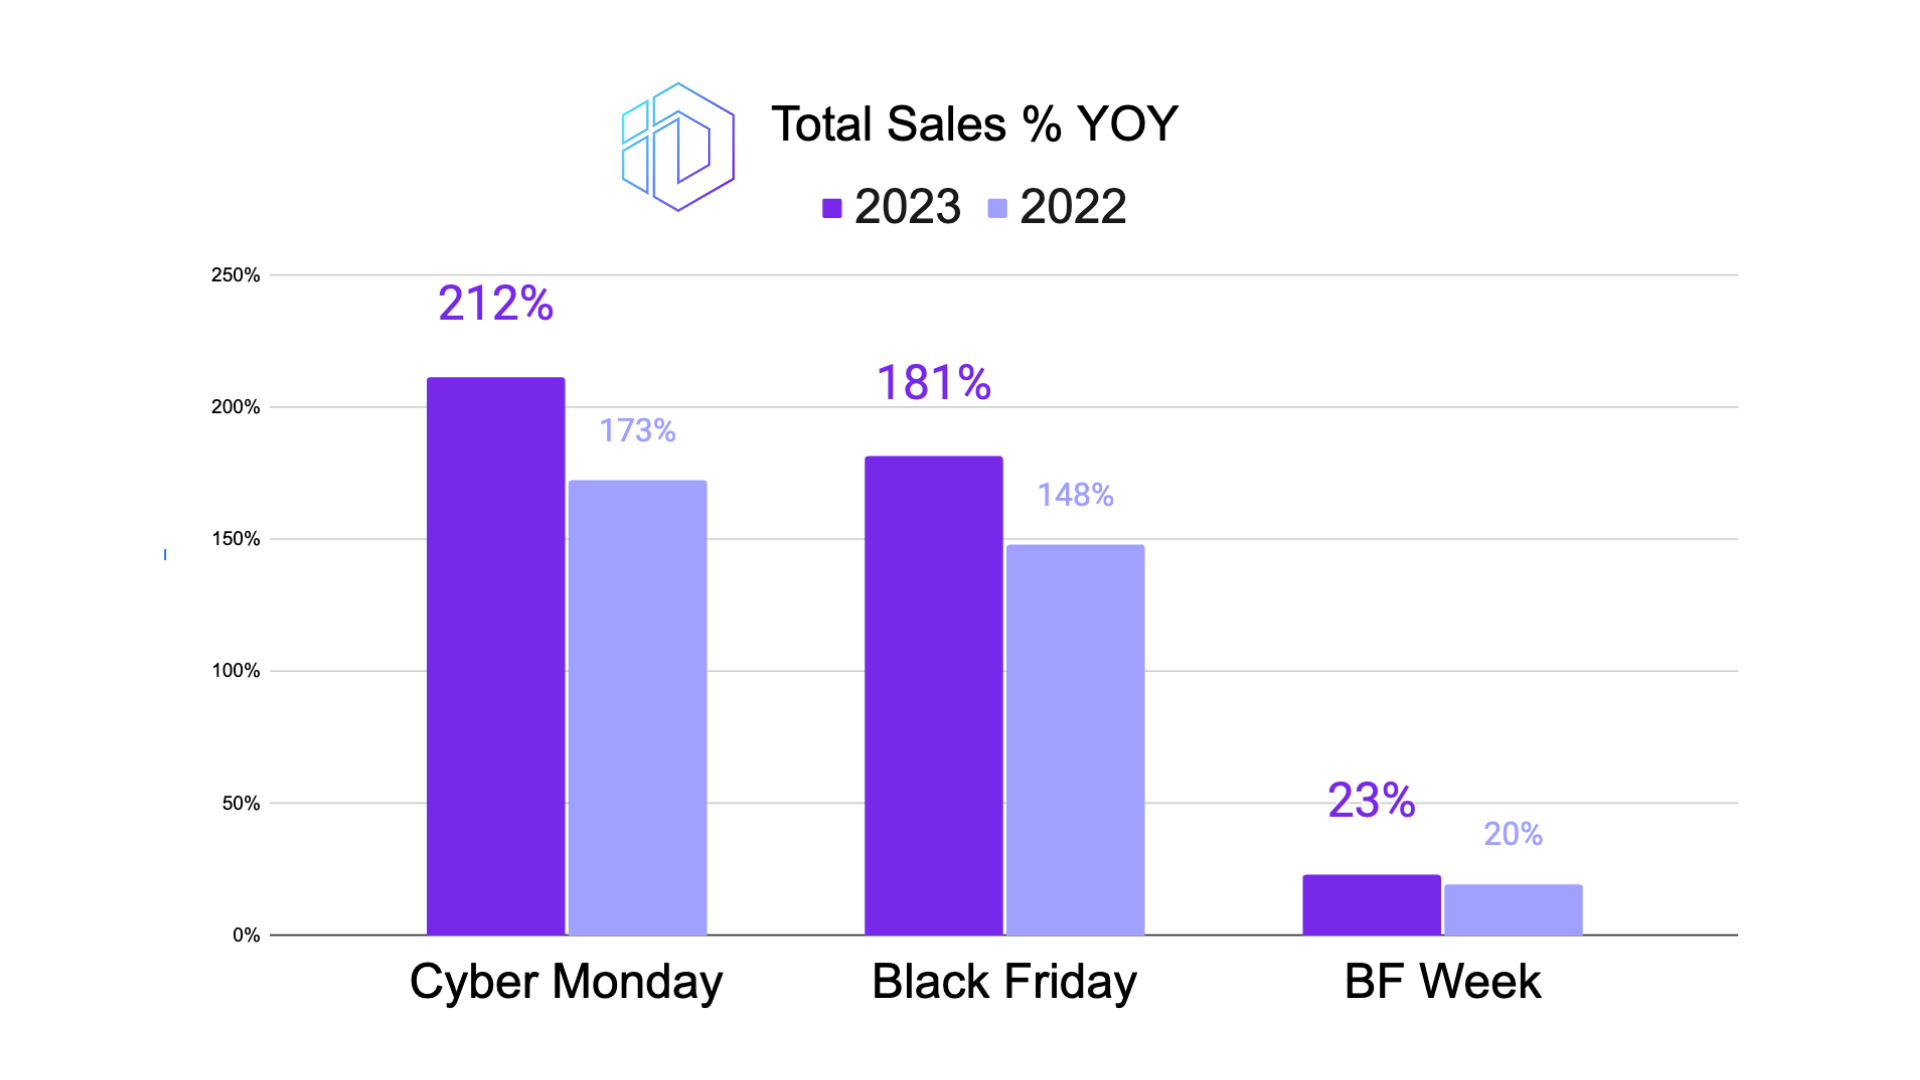 Line graph showing the year-over-year comparison of Total Sales for Cyber Monday, Black Friday, BF Week, and the Average 30-Day Pre BF Week. Notable increases are observed in Cyber Monday and Black Friday sales for 2023 compared to 2022.